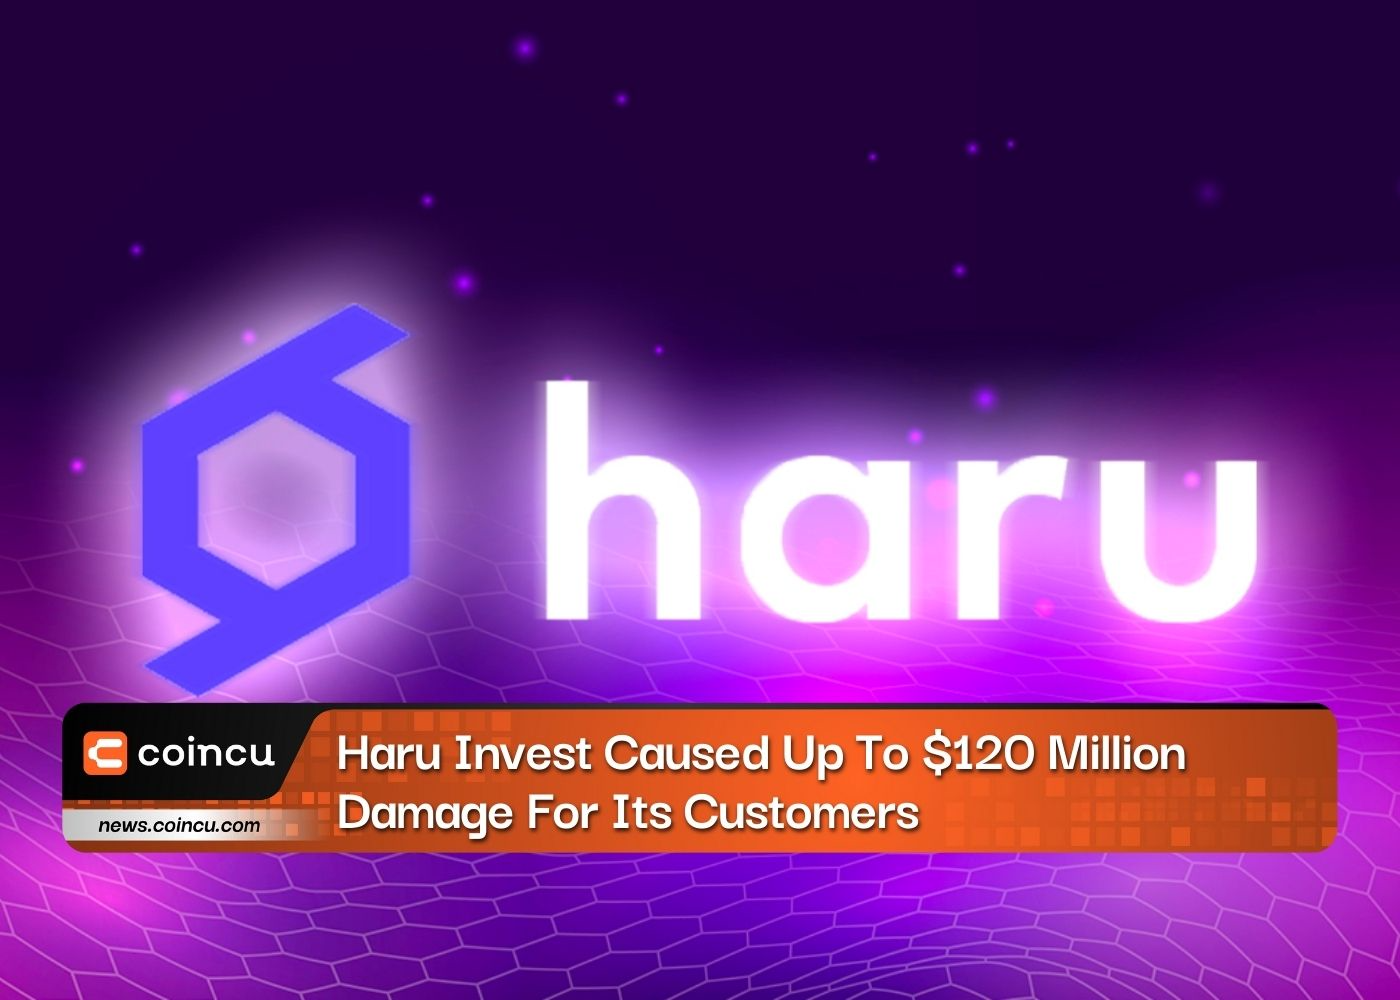 Haru Invest Caused Up To $120 Million Damage For Its Customers